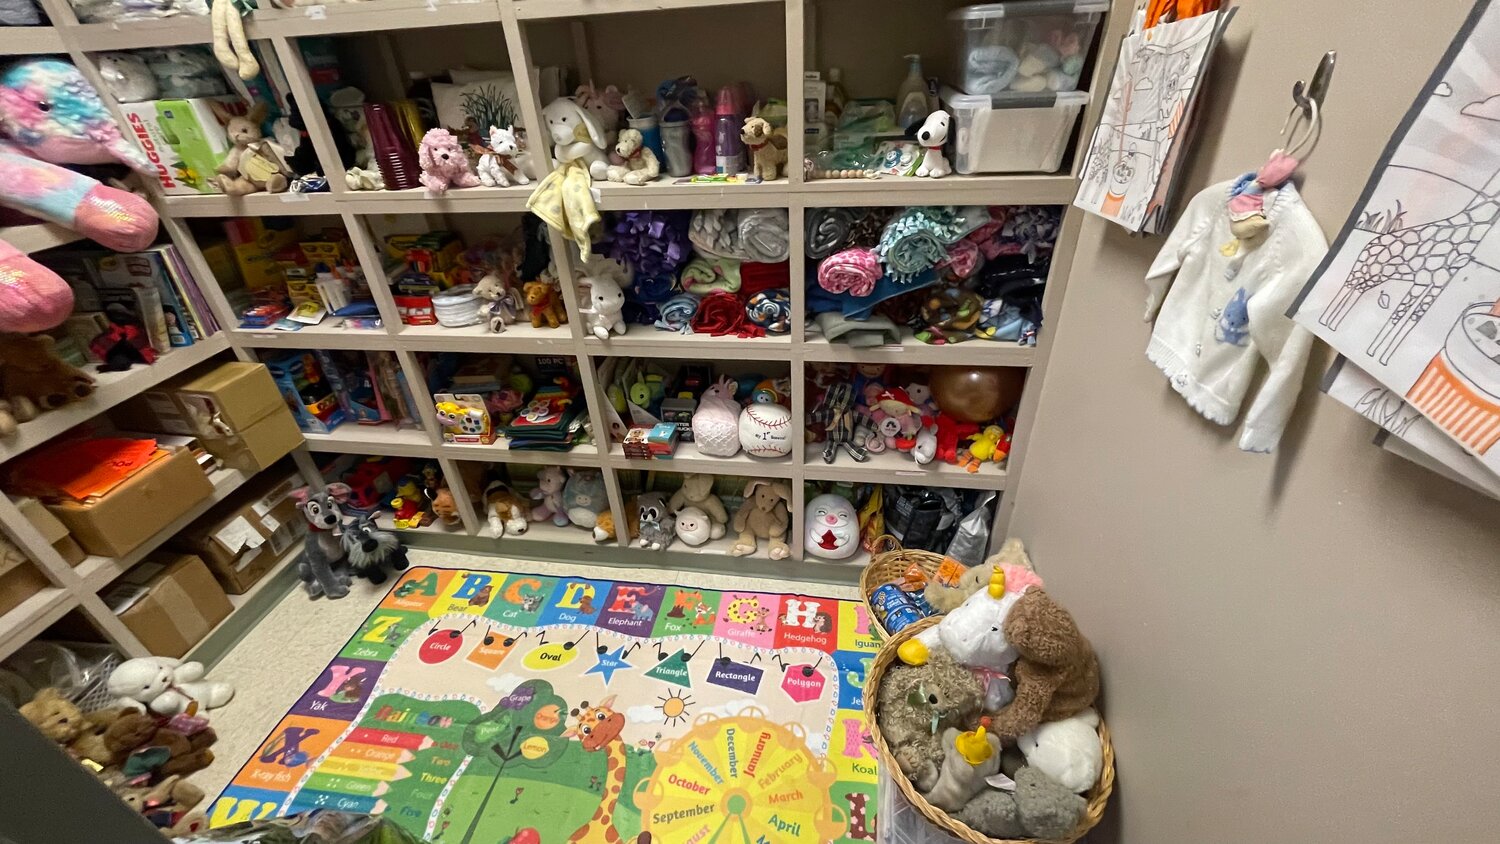 Canon’s Closet, named after a former Ridgeland K-9, houses items that the police department can give to children and pets in need.